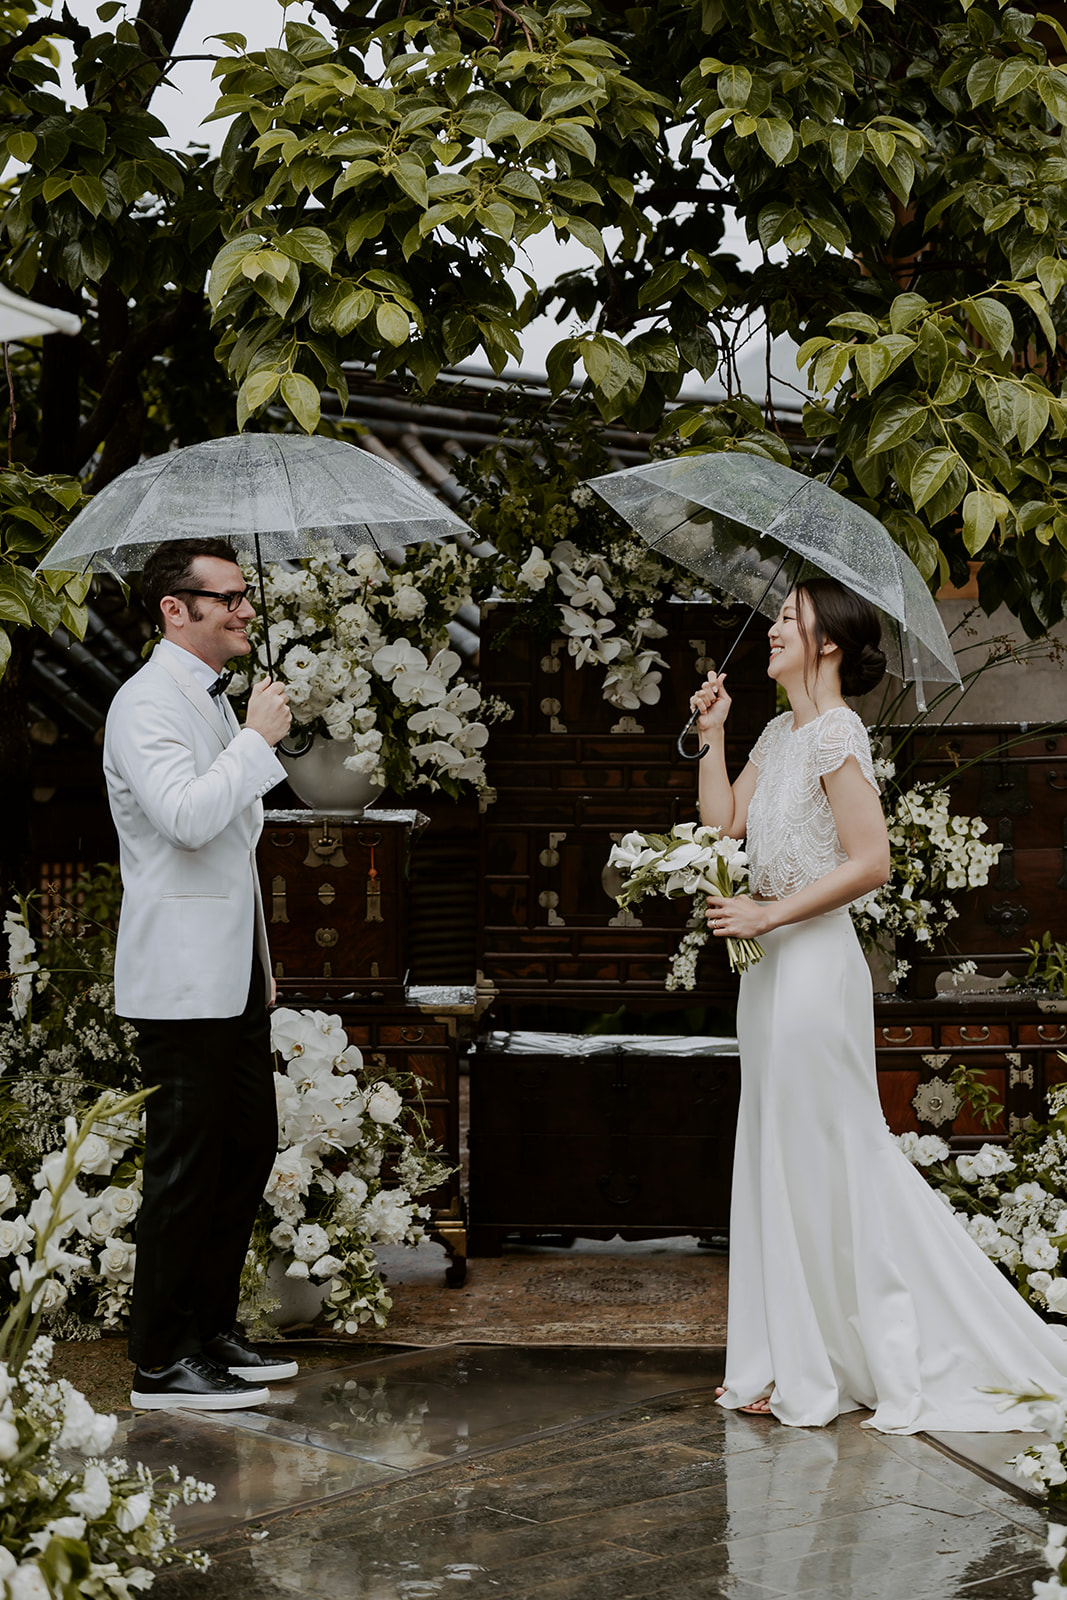 A wedding couple saying their vows under umbrellas in the rain during a South Korean ceremony.